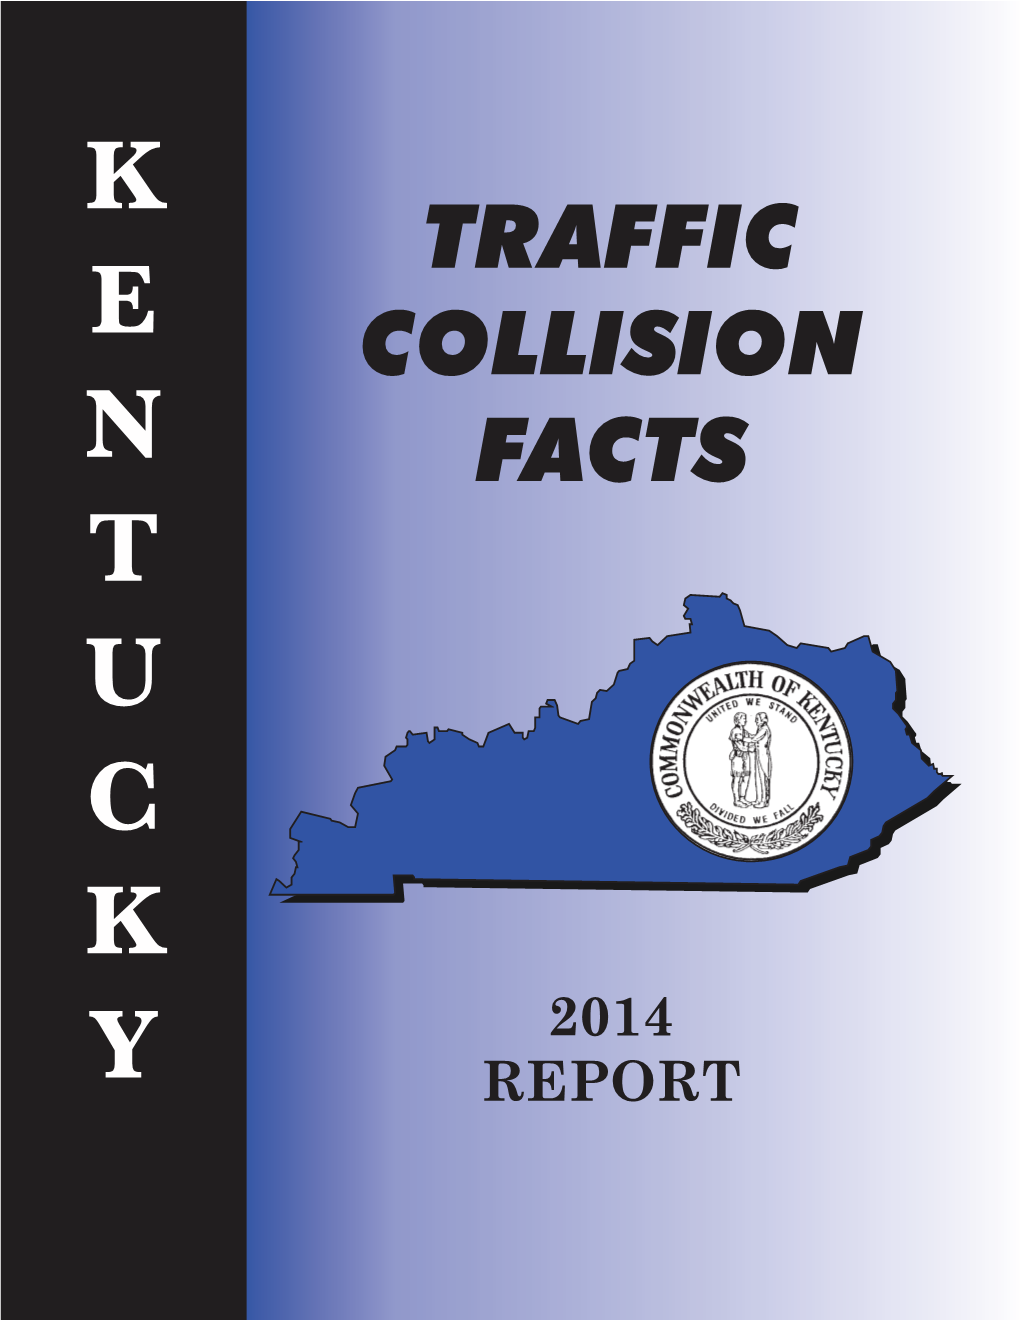 KENTUCKY TRAFFIC COLLISION FACTS Report Provides Us with Valuable Statistics Concerning Traffic Collisions on the Roadways of Our Commonwealth